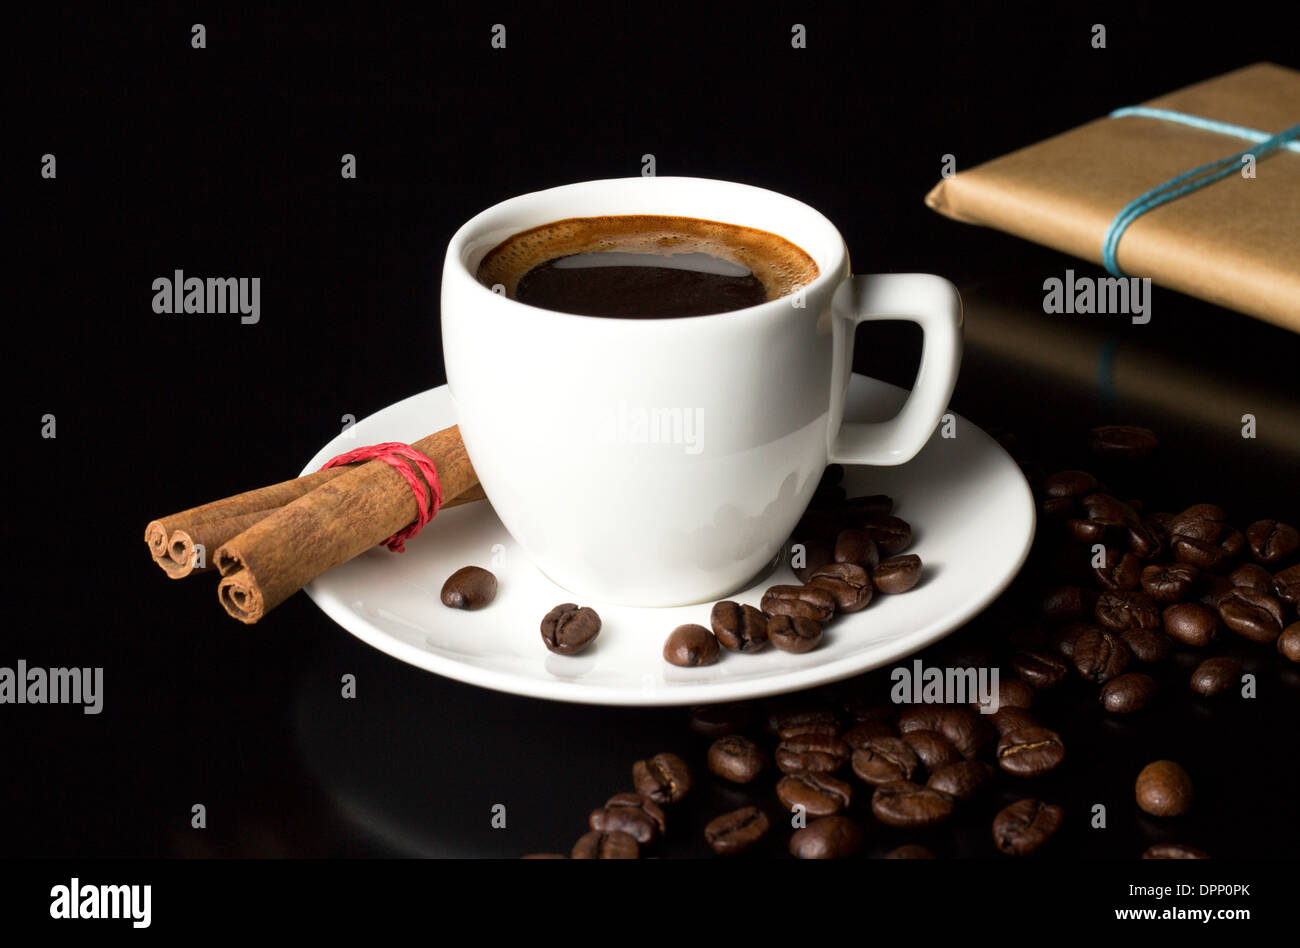 natural coffee cup with beans and gift on table Stock Photo